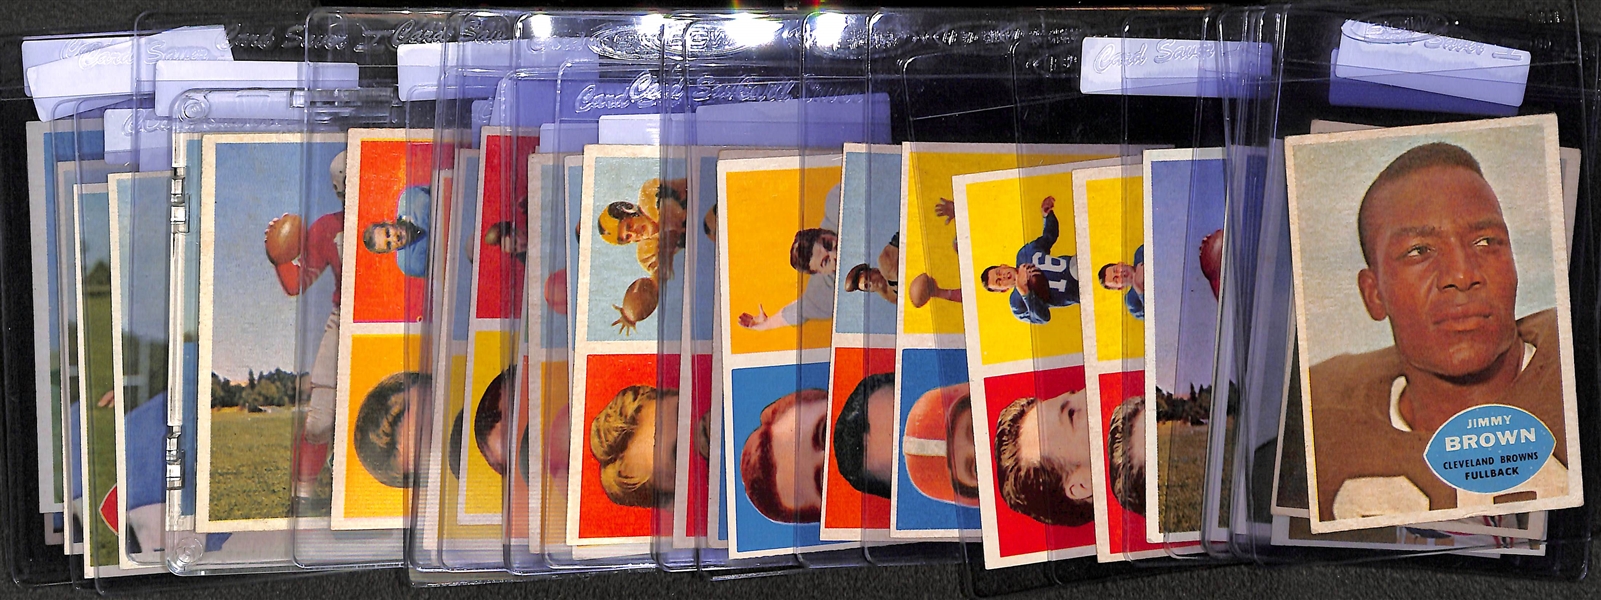 Lot of (29) 1957 & 1960 Topps Football Cards w. Frank Gifford, Jim Brown and Many More!